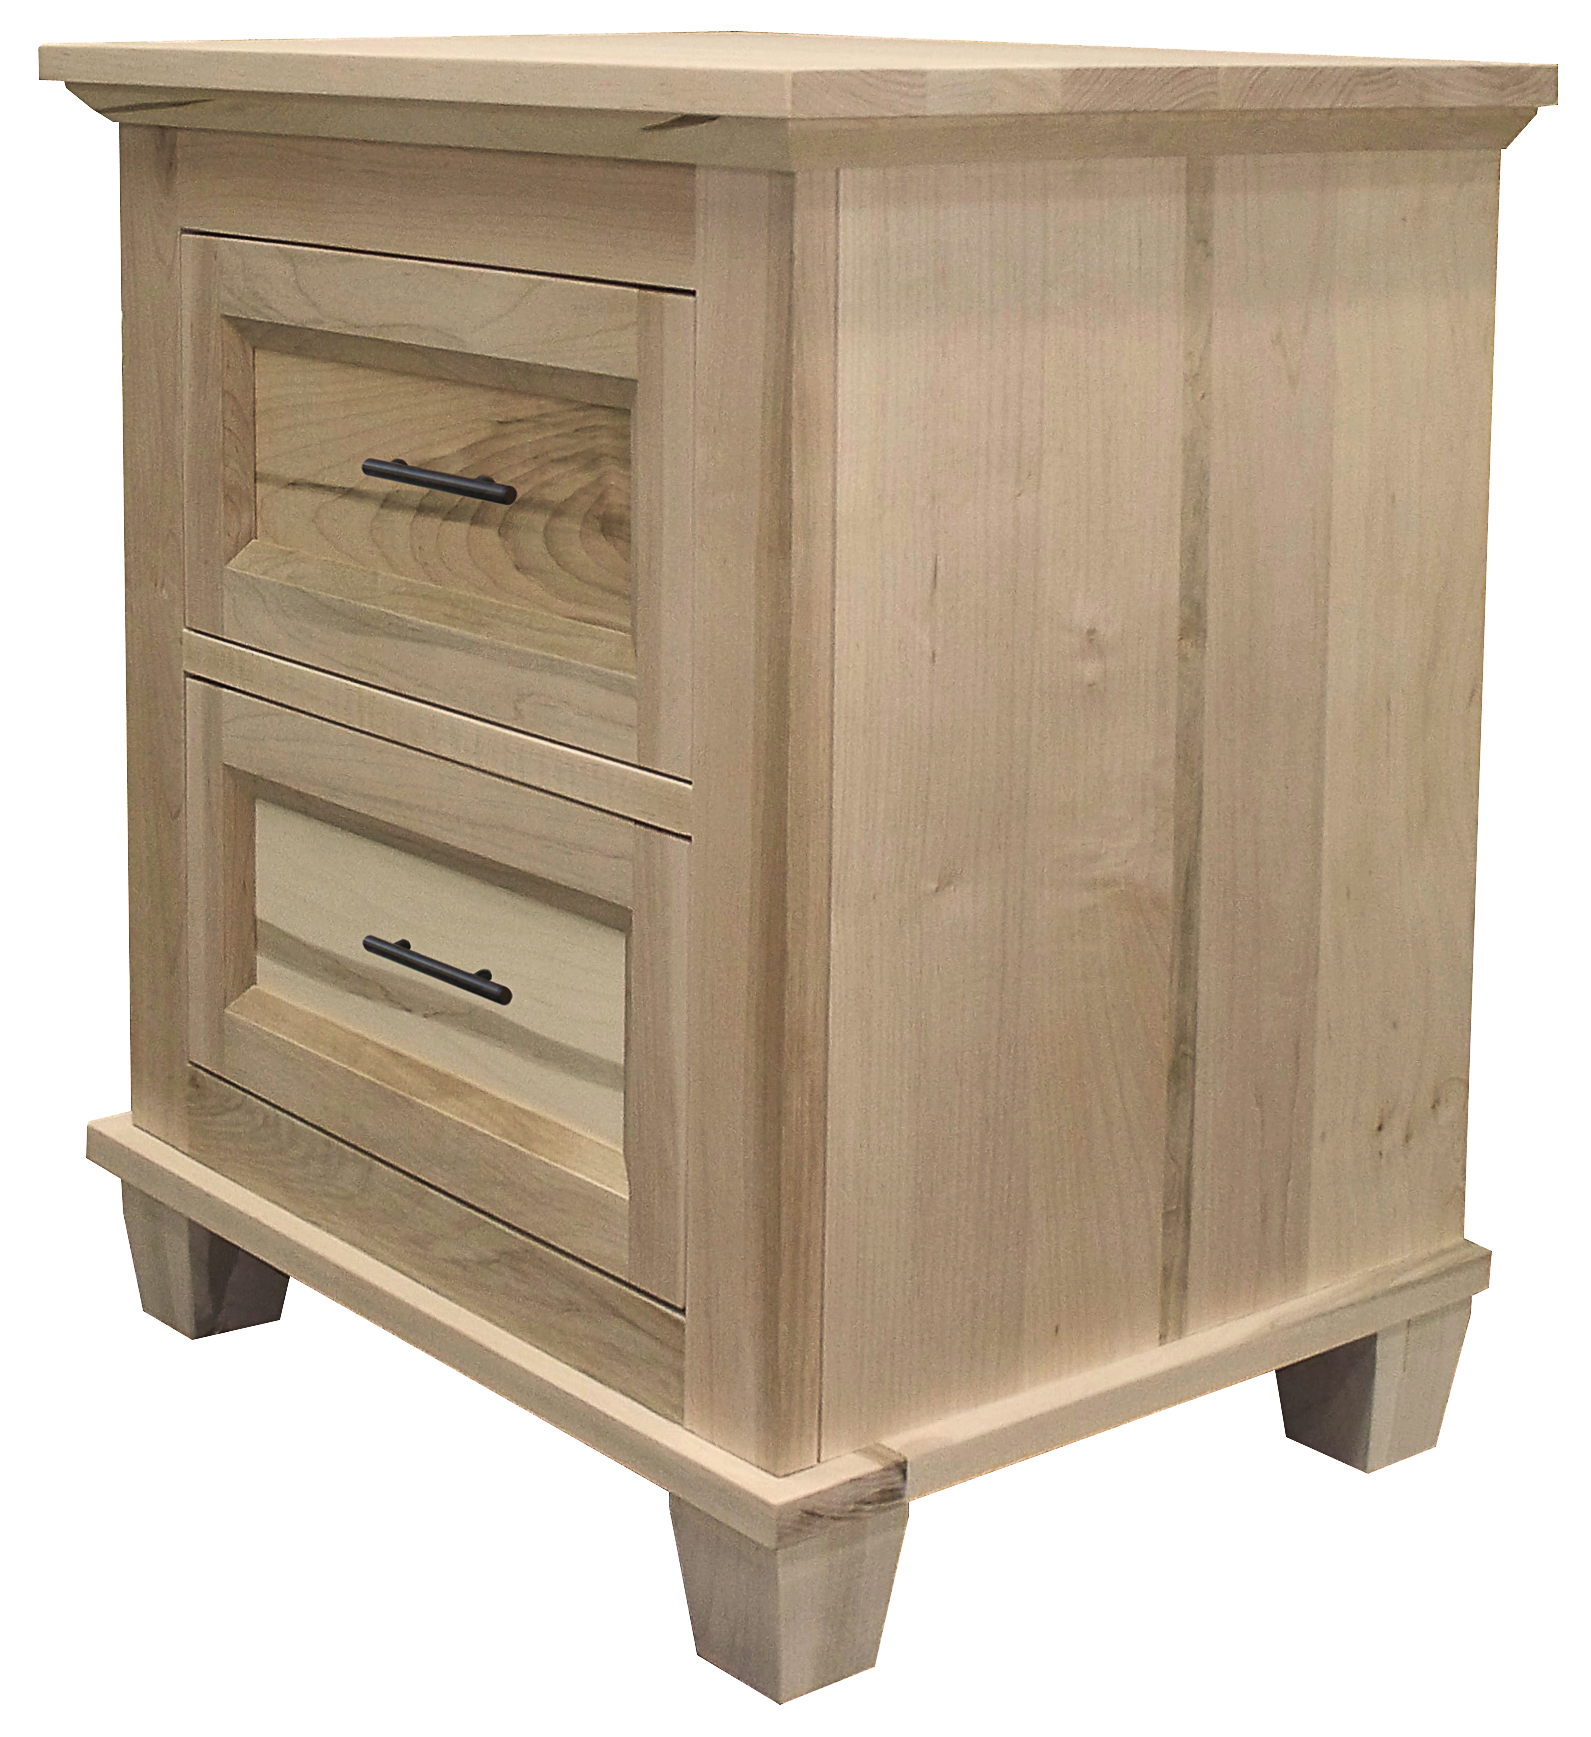 Algonquin 2 Drawer Nightstand in Unfinished Brown Maple